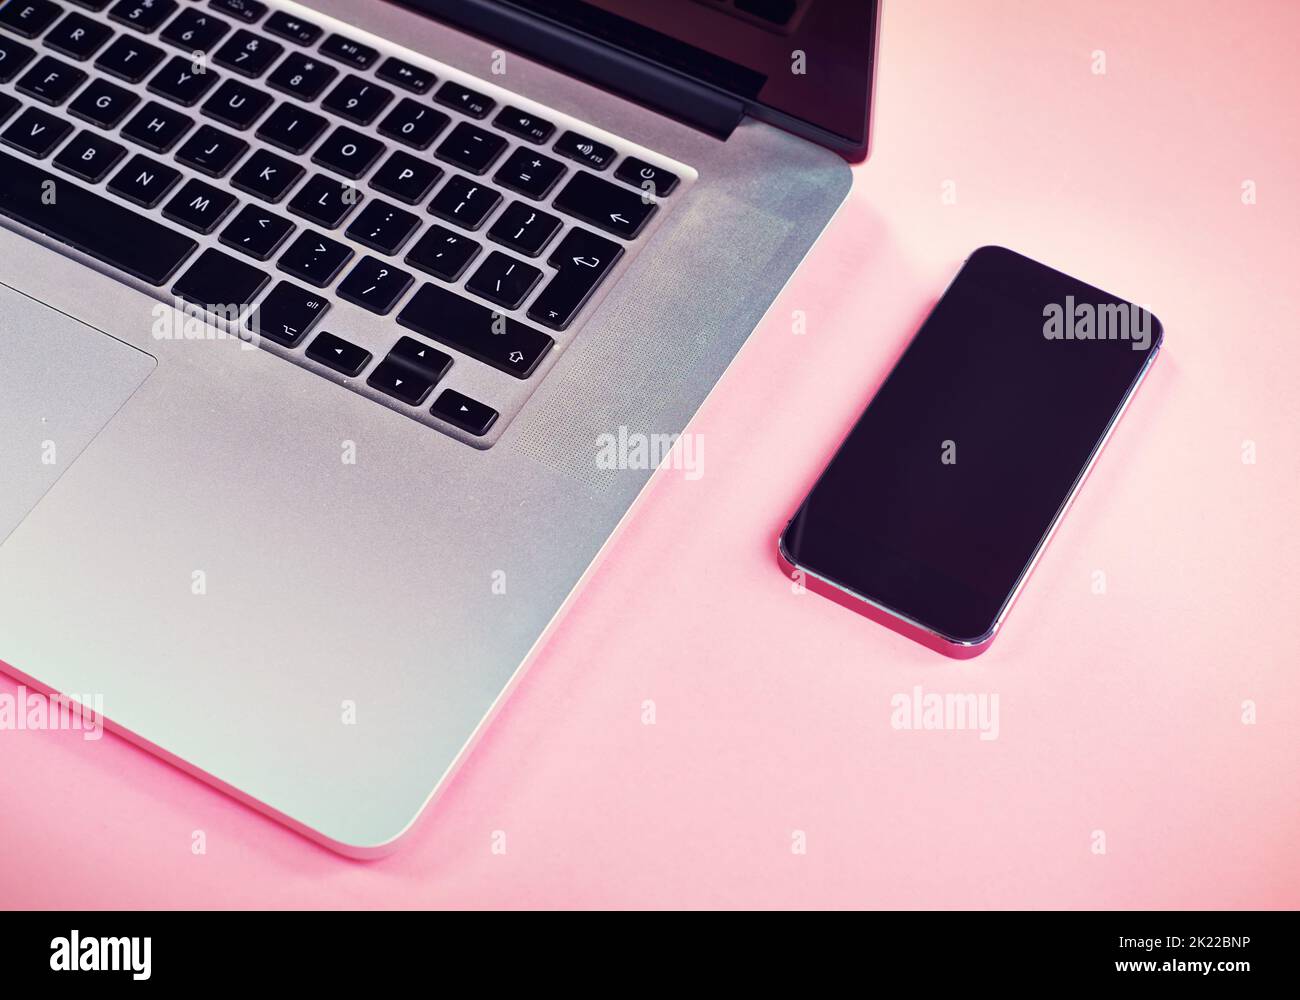 Bring your own device to the table. Studio shot of a laptop and smartphone on a pink background. Stock Photo